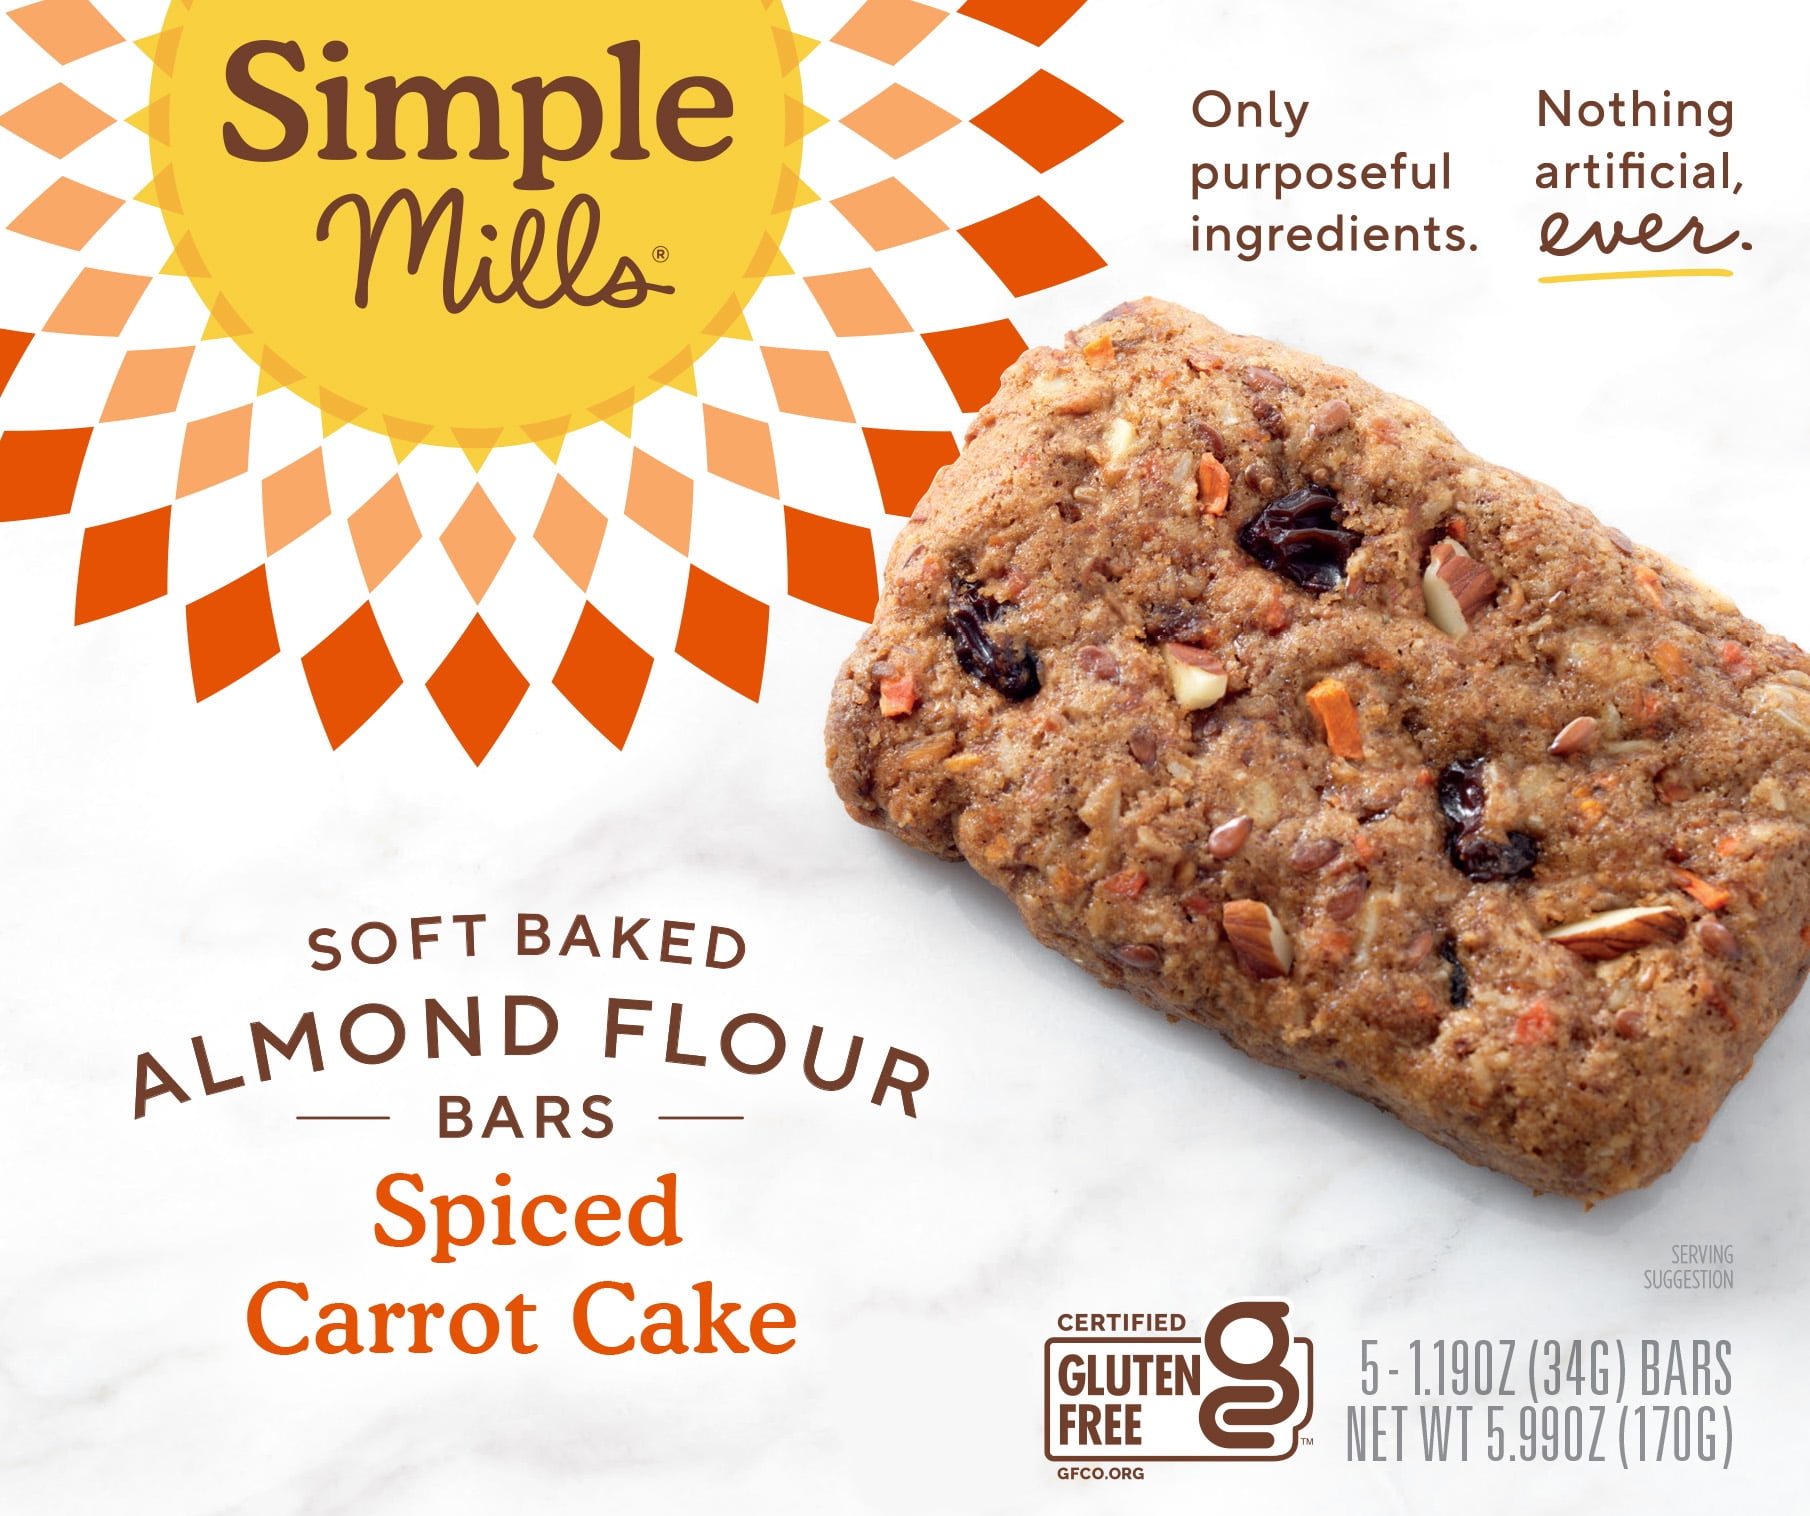 Simple Mills Soft Baked Almond Flour Bars, Spiced Carrot Cake, Gluten-Free, 5 Count